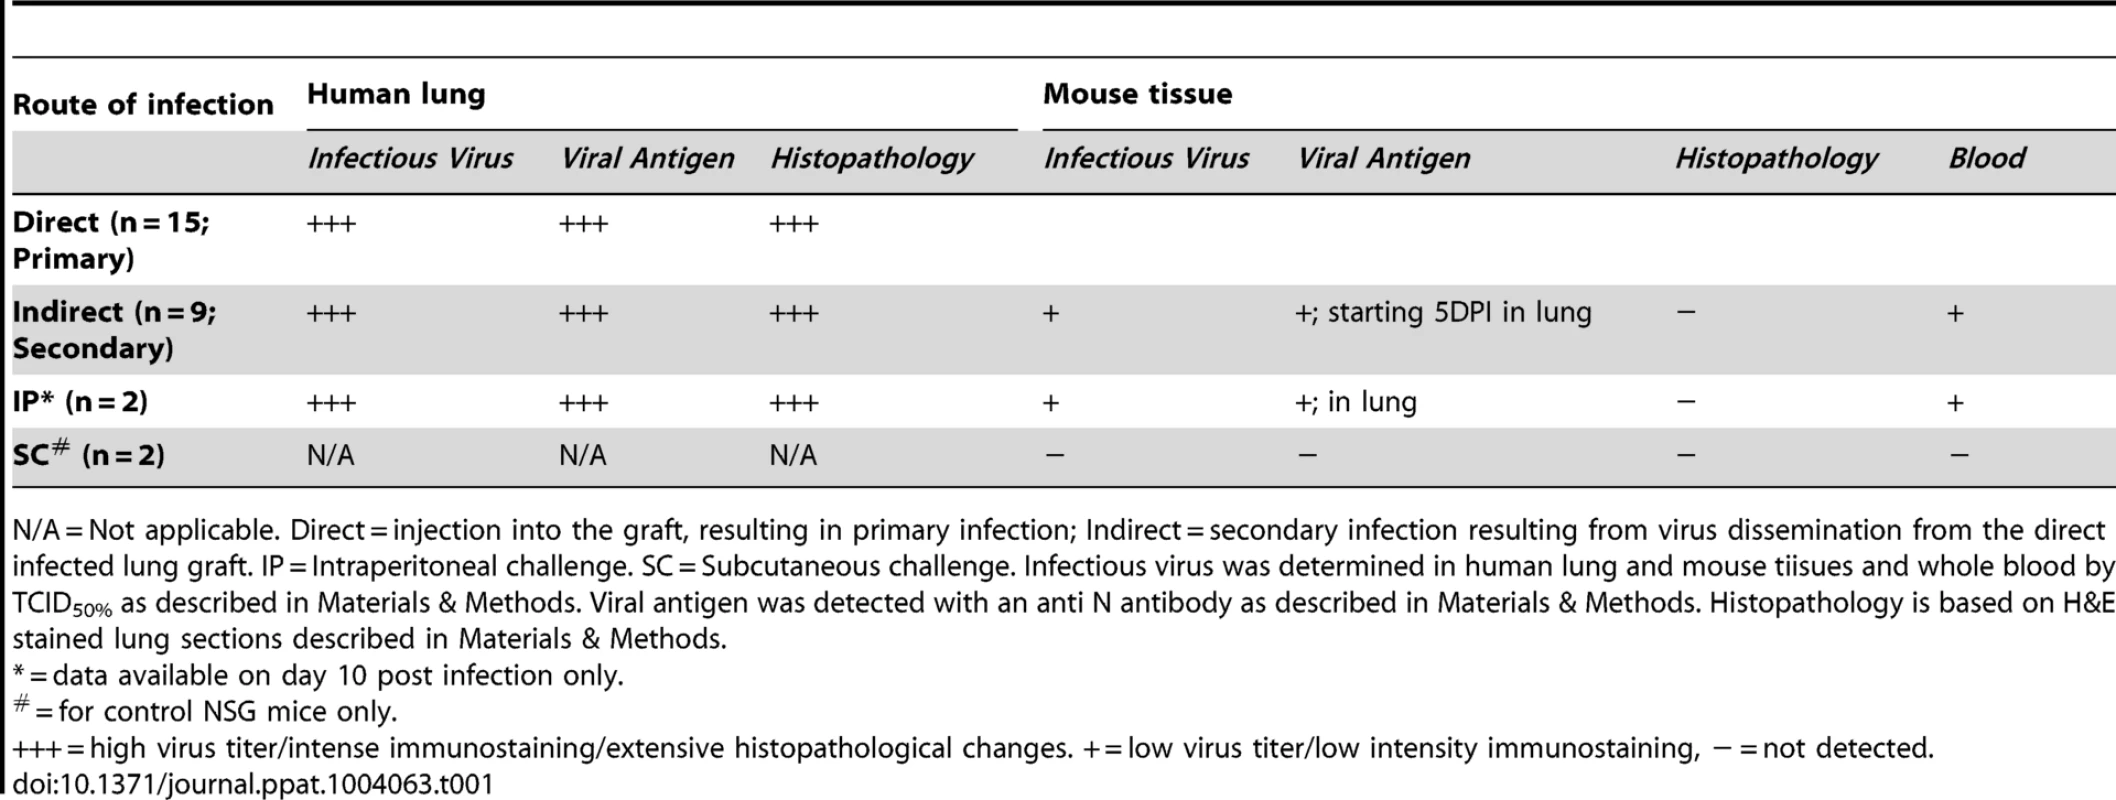 Summary of virological and histological findings in human lung graft, mouse tissues and blood following Nipah virus challenge.